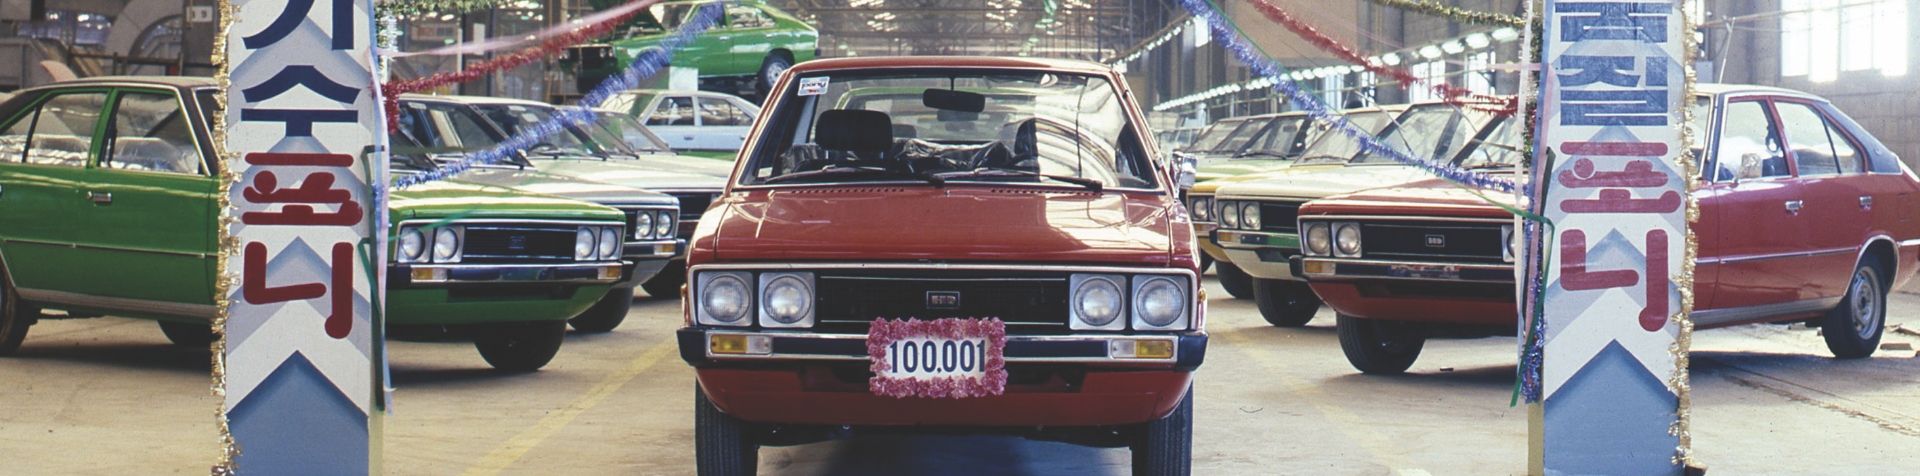 The original red PONY facing forward with a number plate "100.001" written on the front. The PONY is surrounded by other PONYs in different colors on both sides.